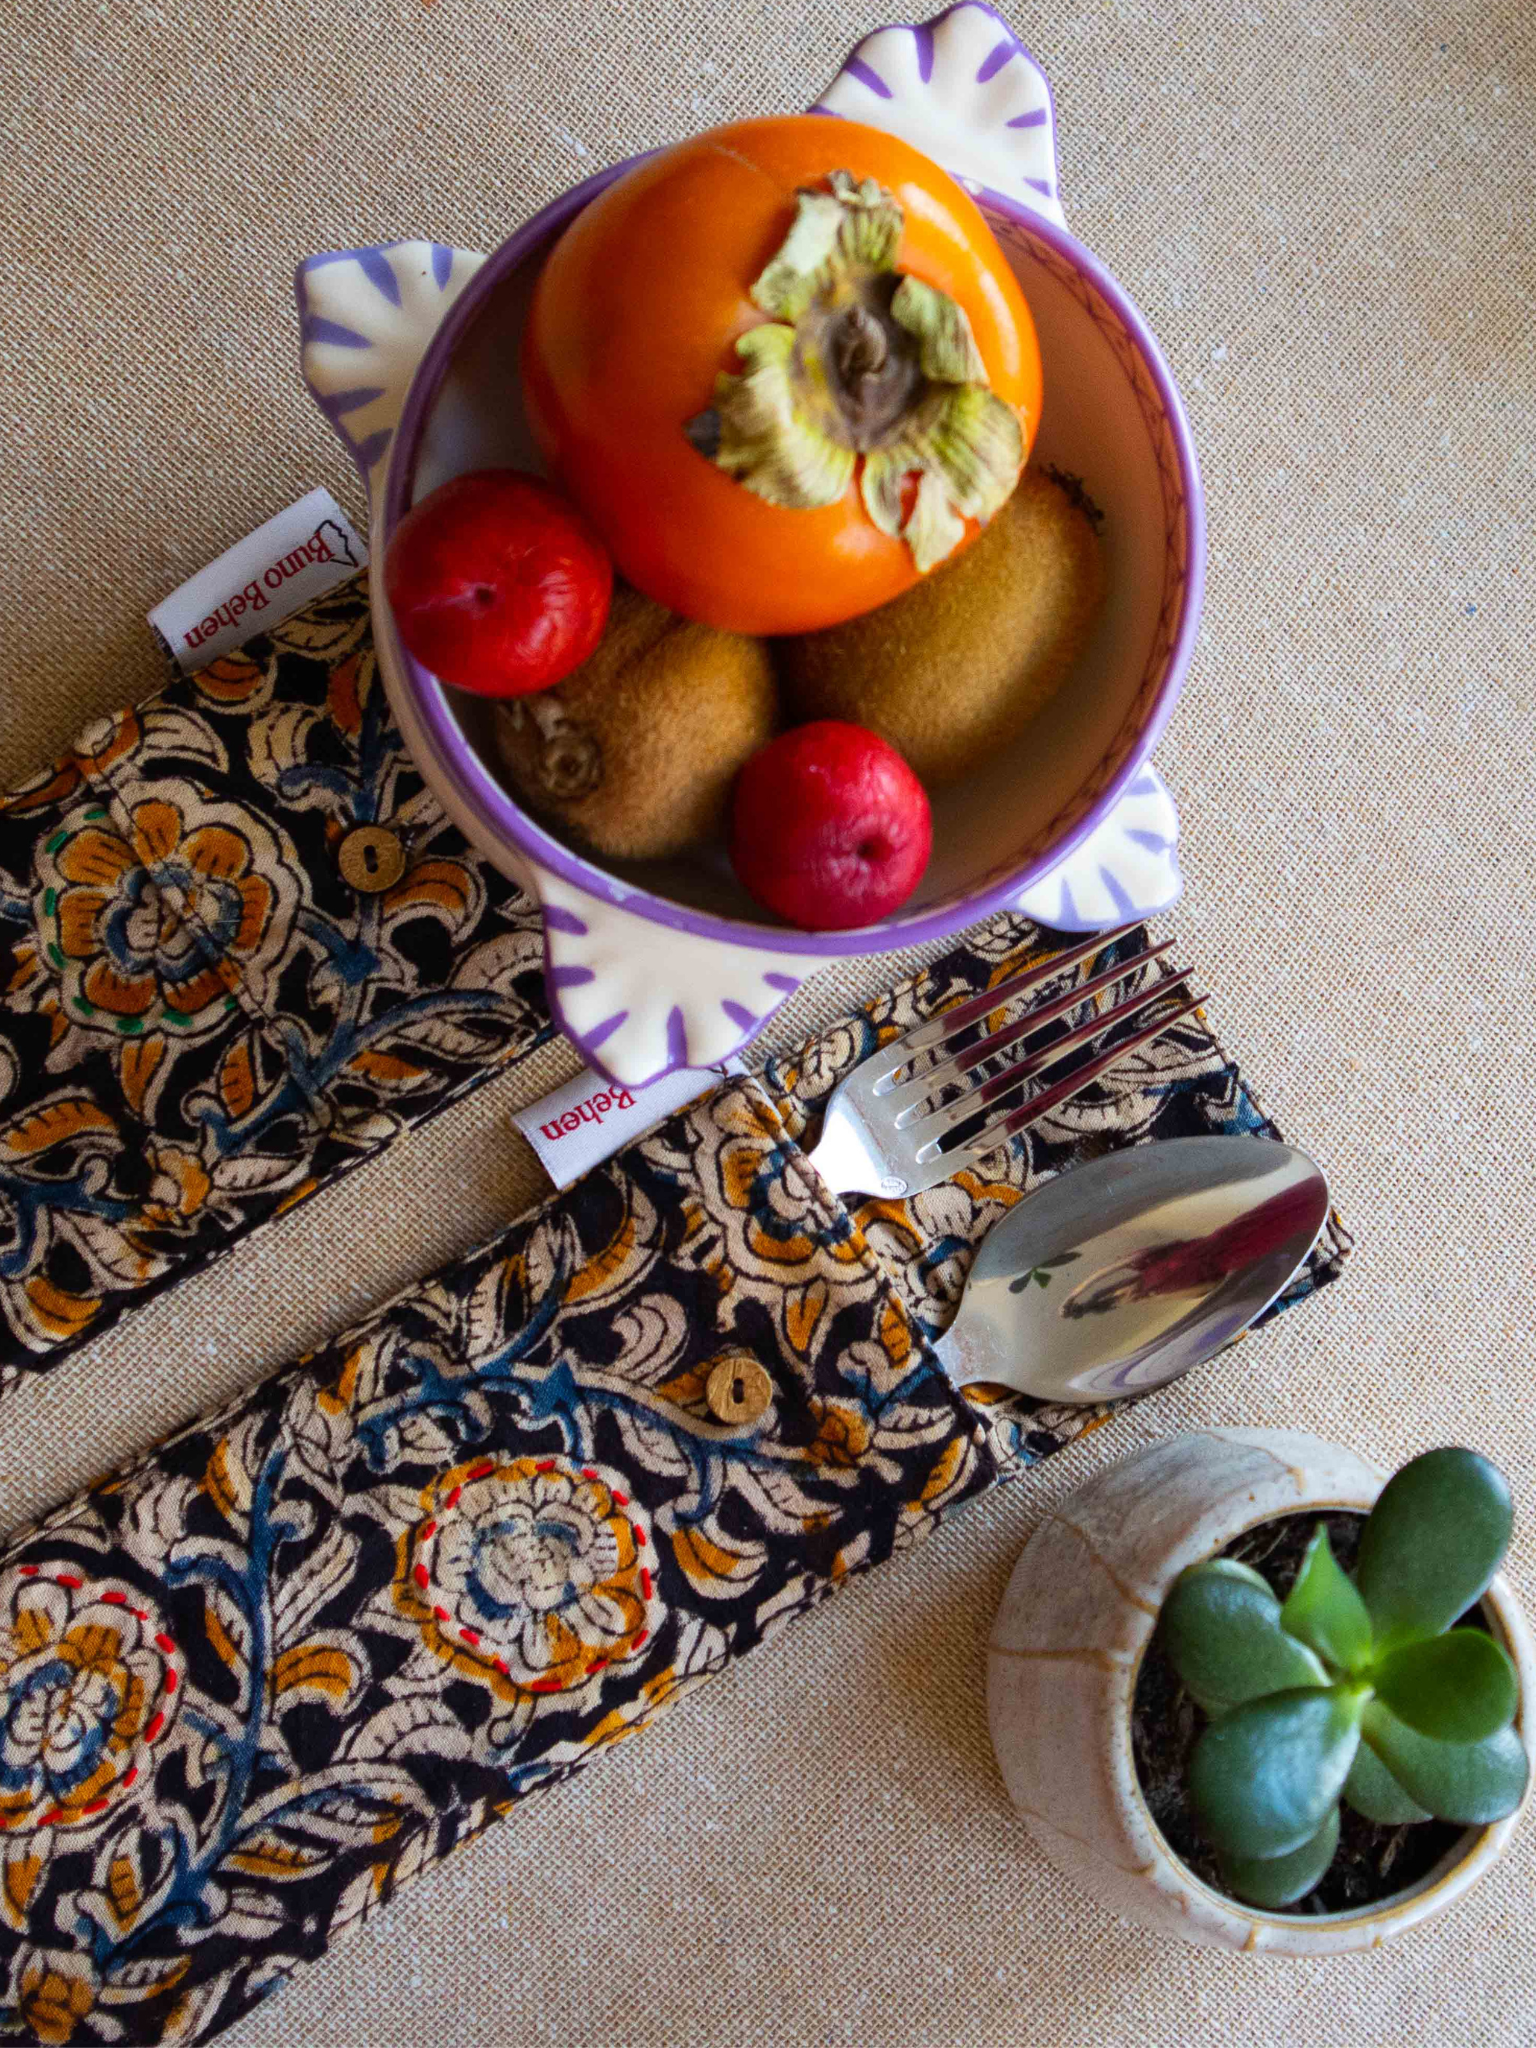 Shop Our Sustainable Utensil and Toiletry Caddy